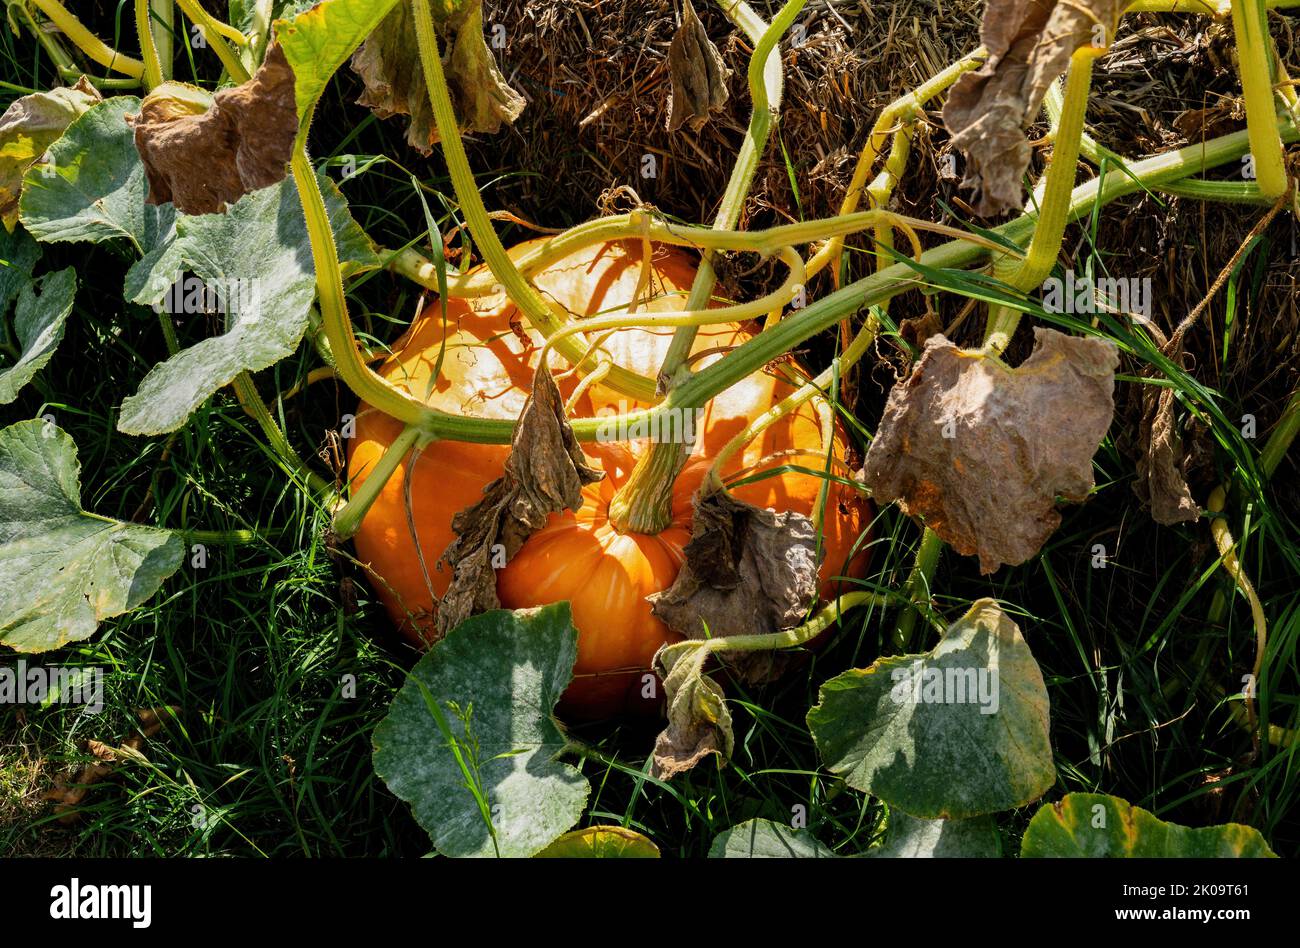 Big orange Pumpkin growing in the garden on a sunny summer day Stock Photo